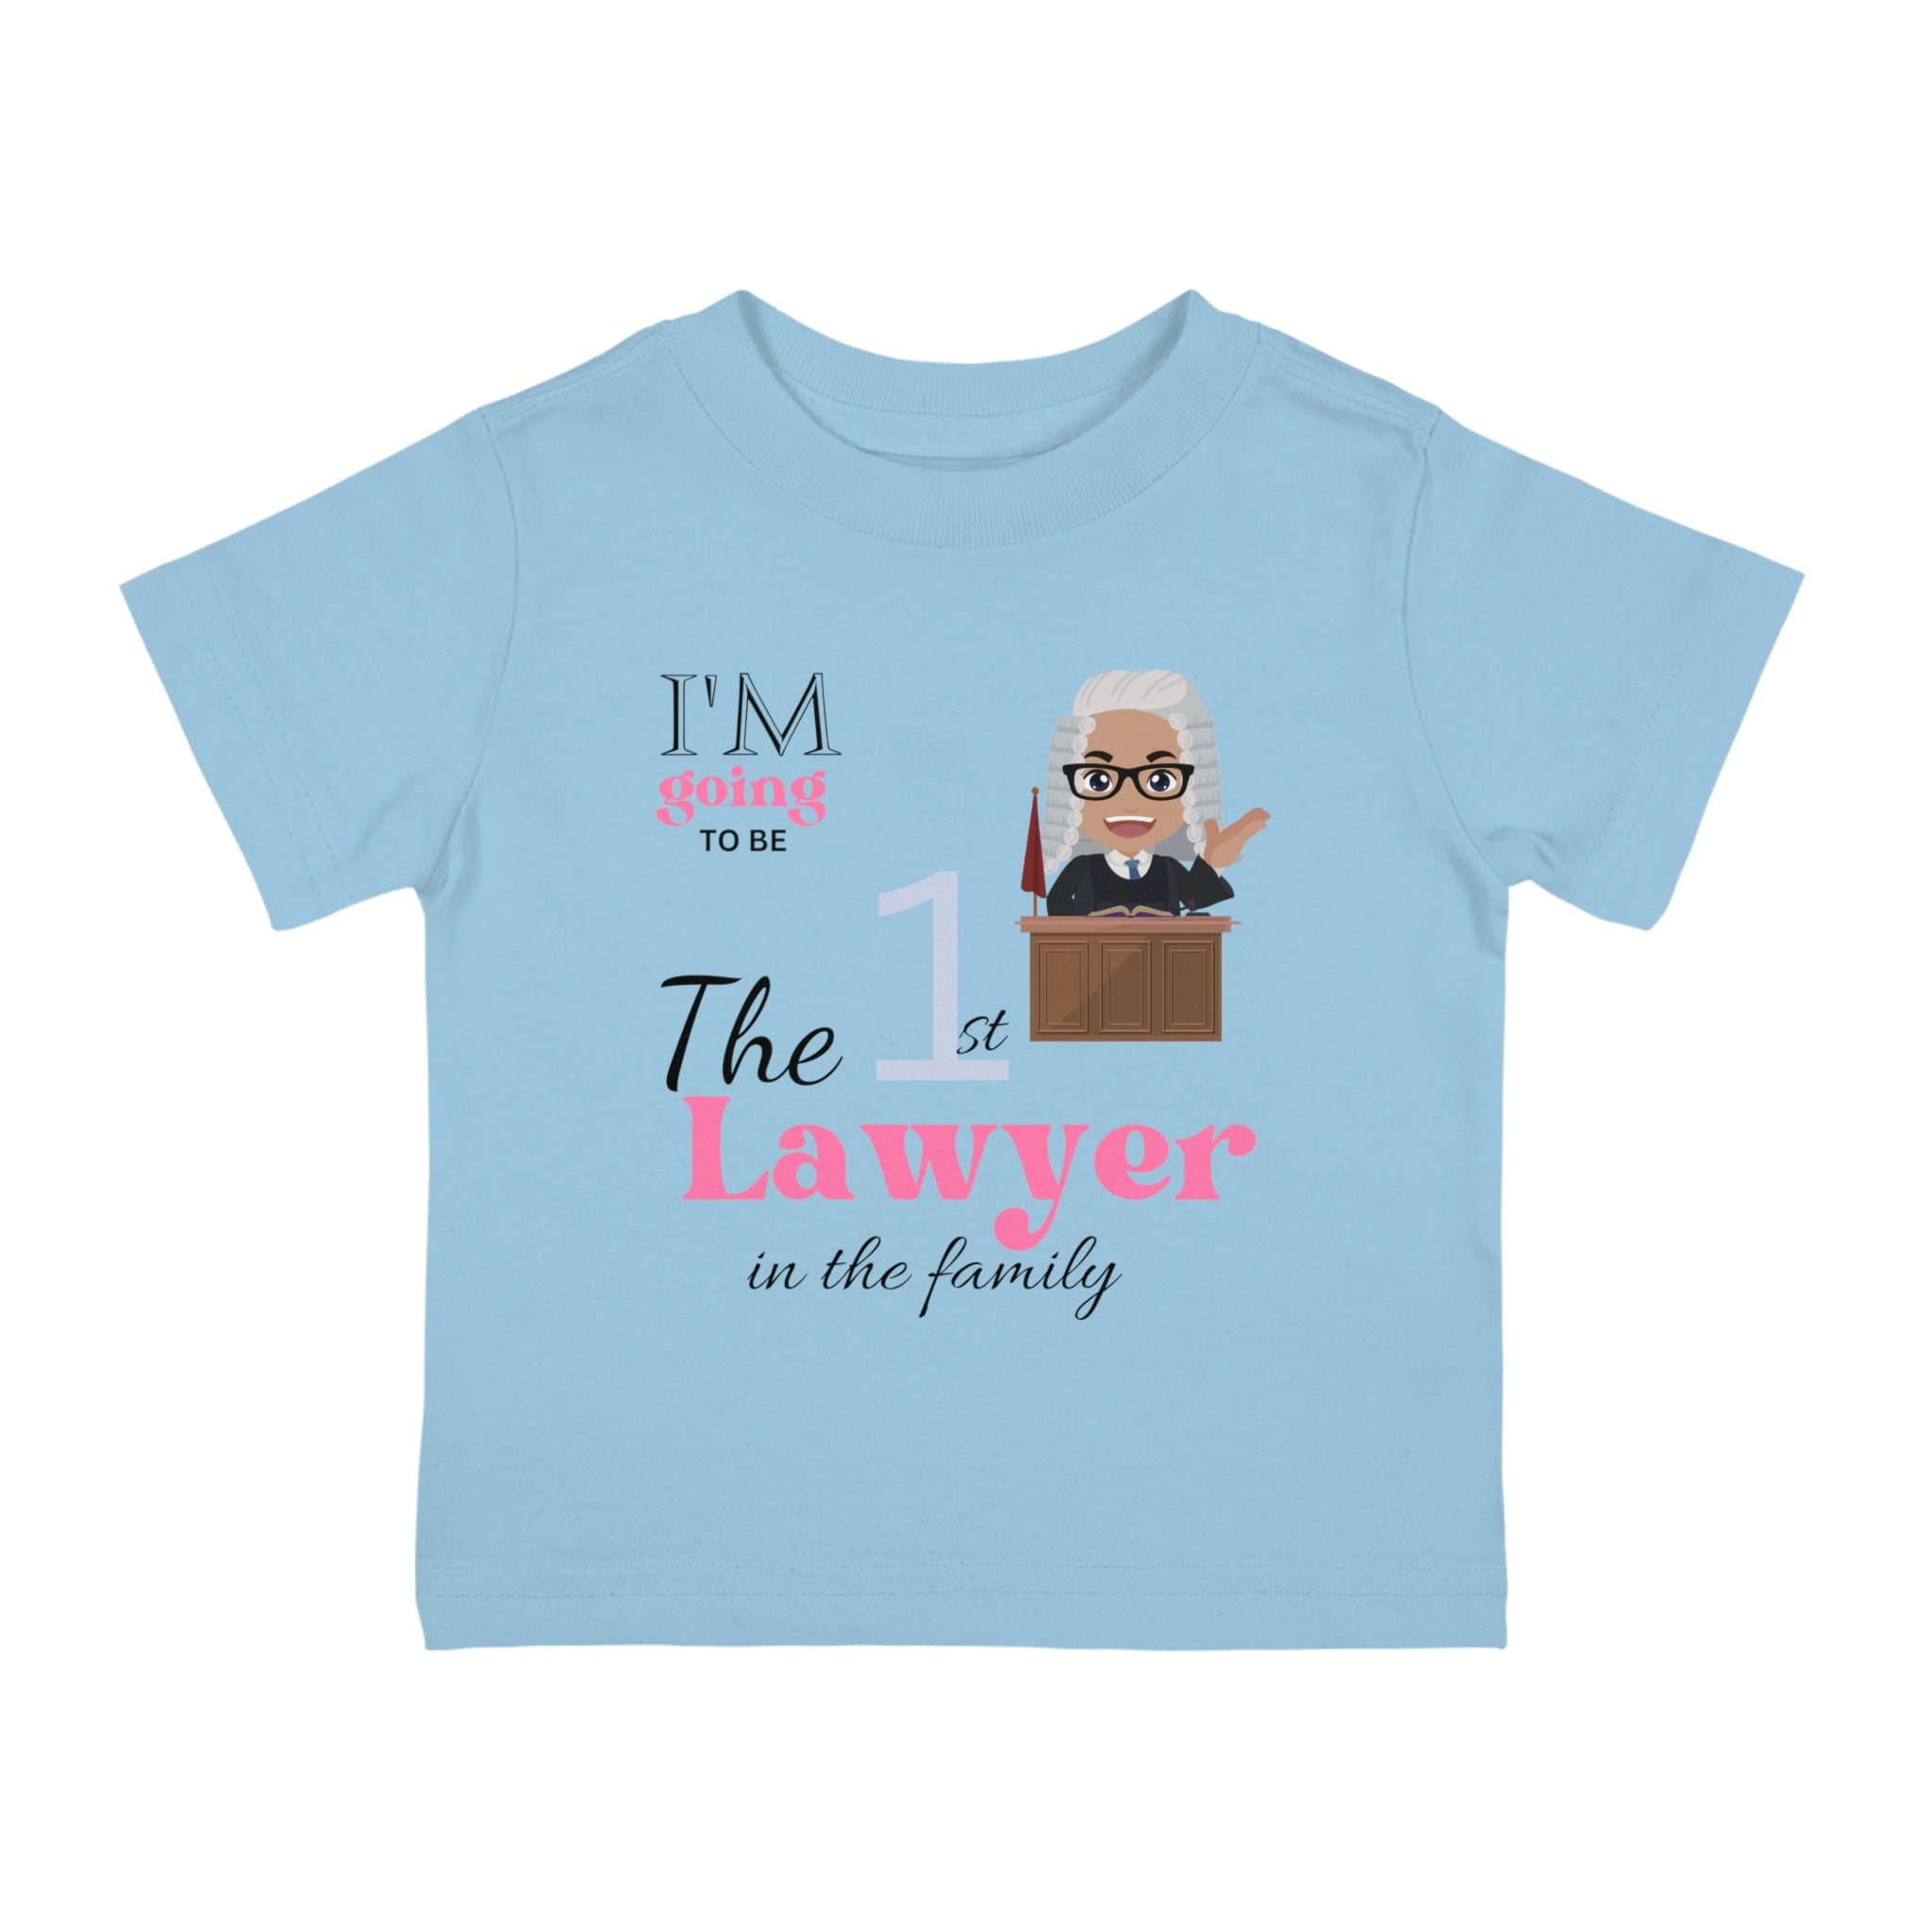 The 1st Lawyer Infant Shirt, Baby Tee, Infant Tee